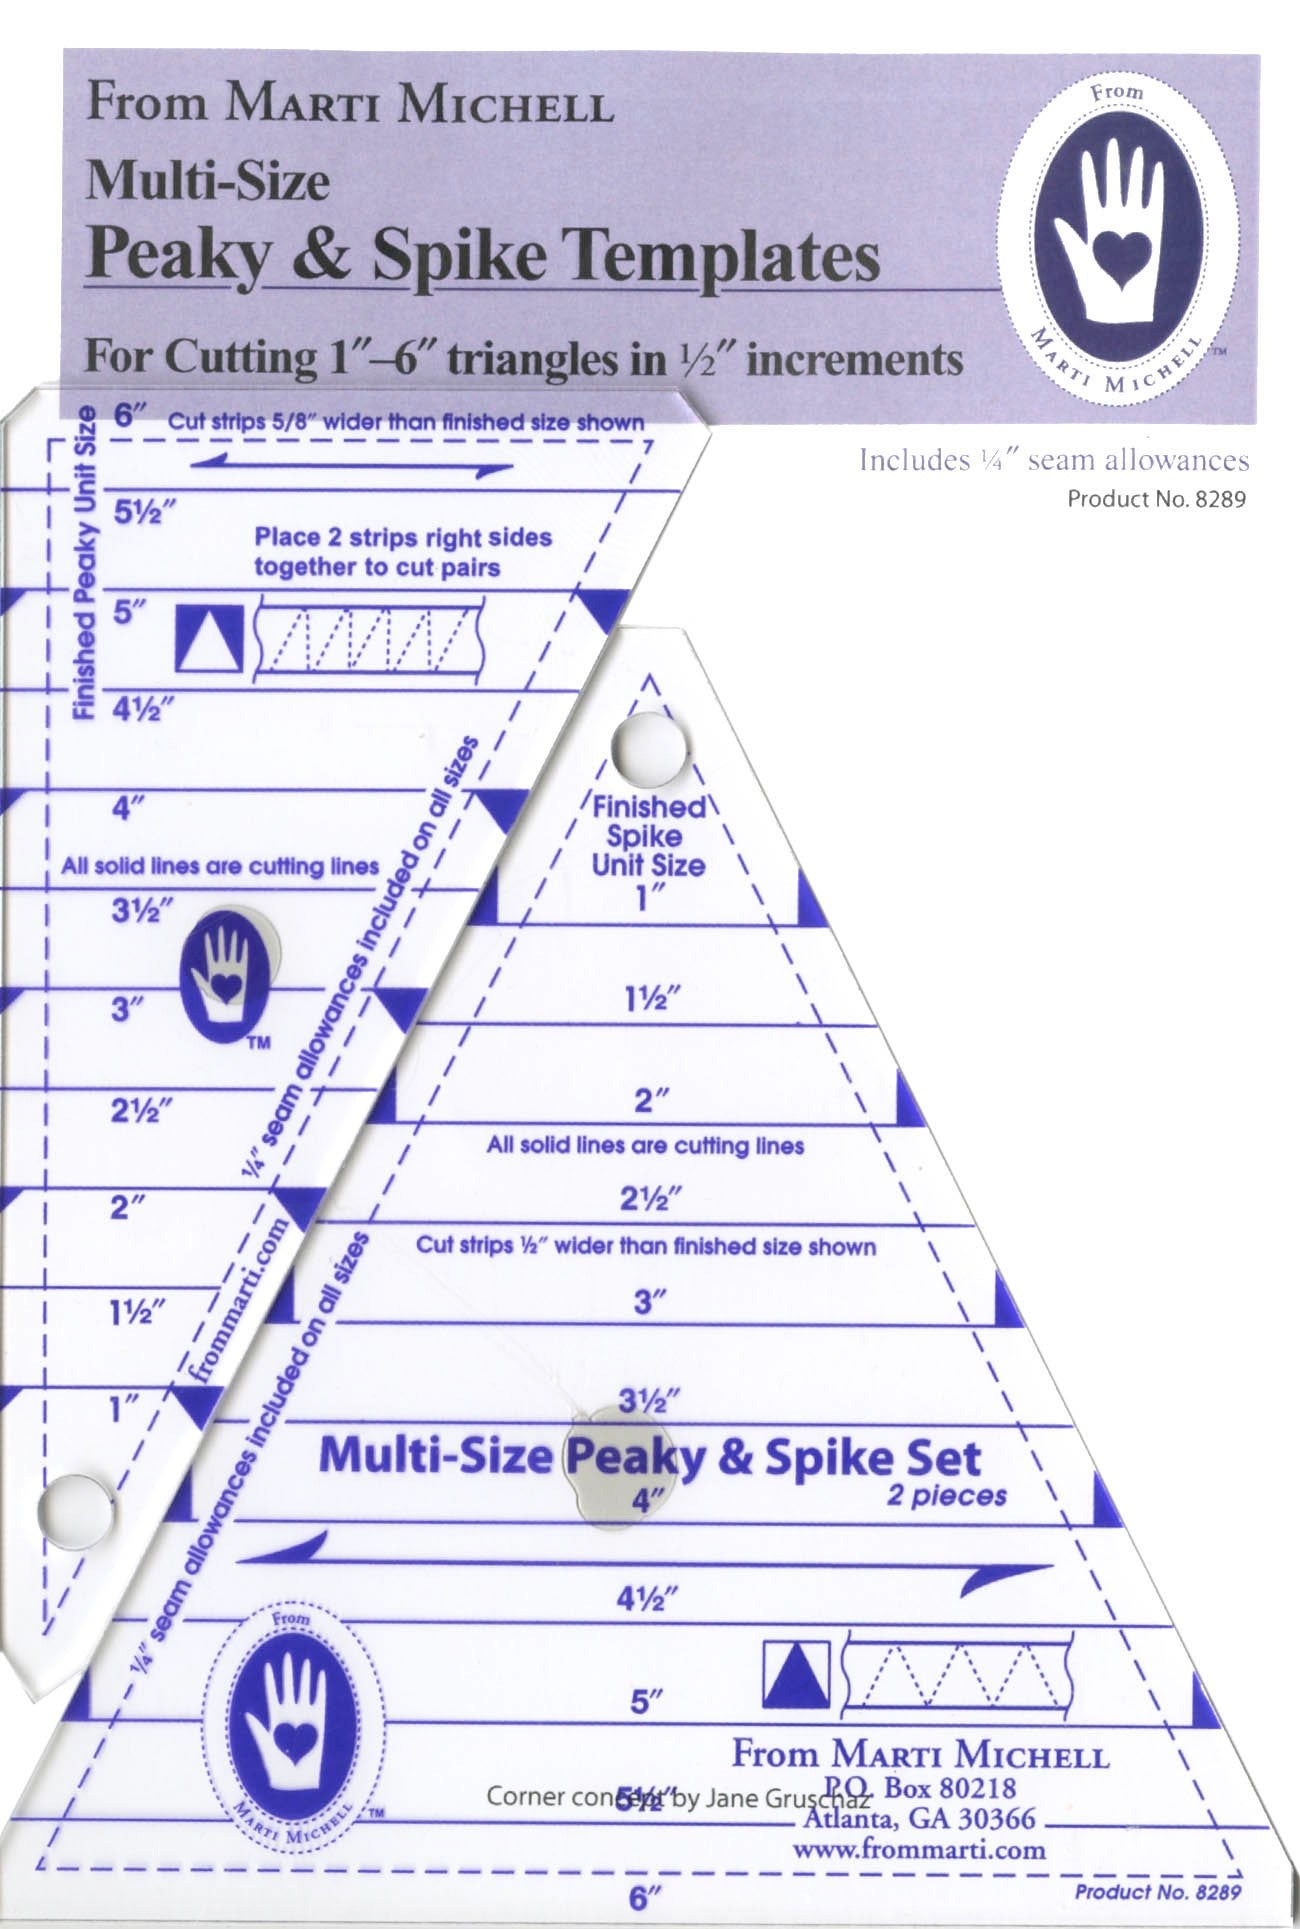 Multi-Size Peaky and Spike Template Set From Marti Michell